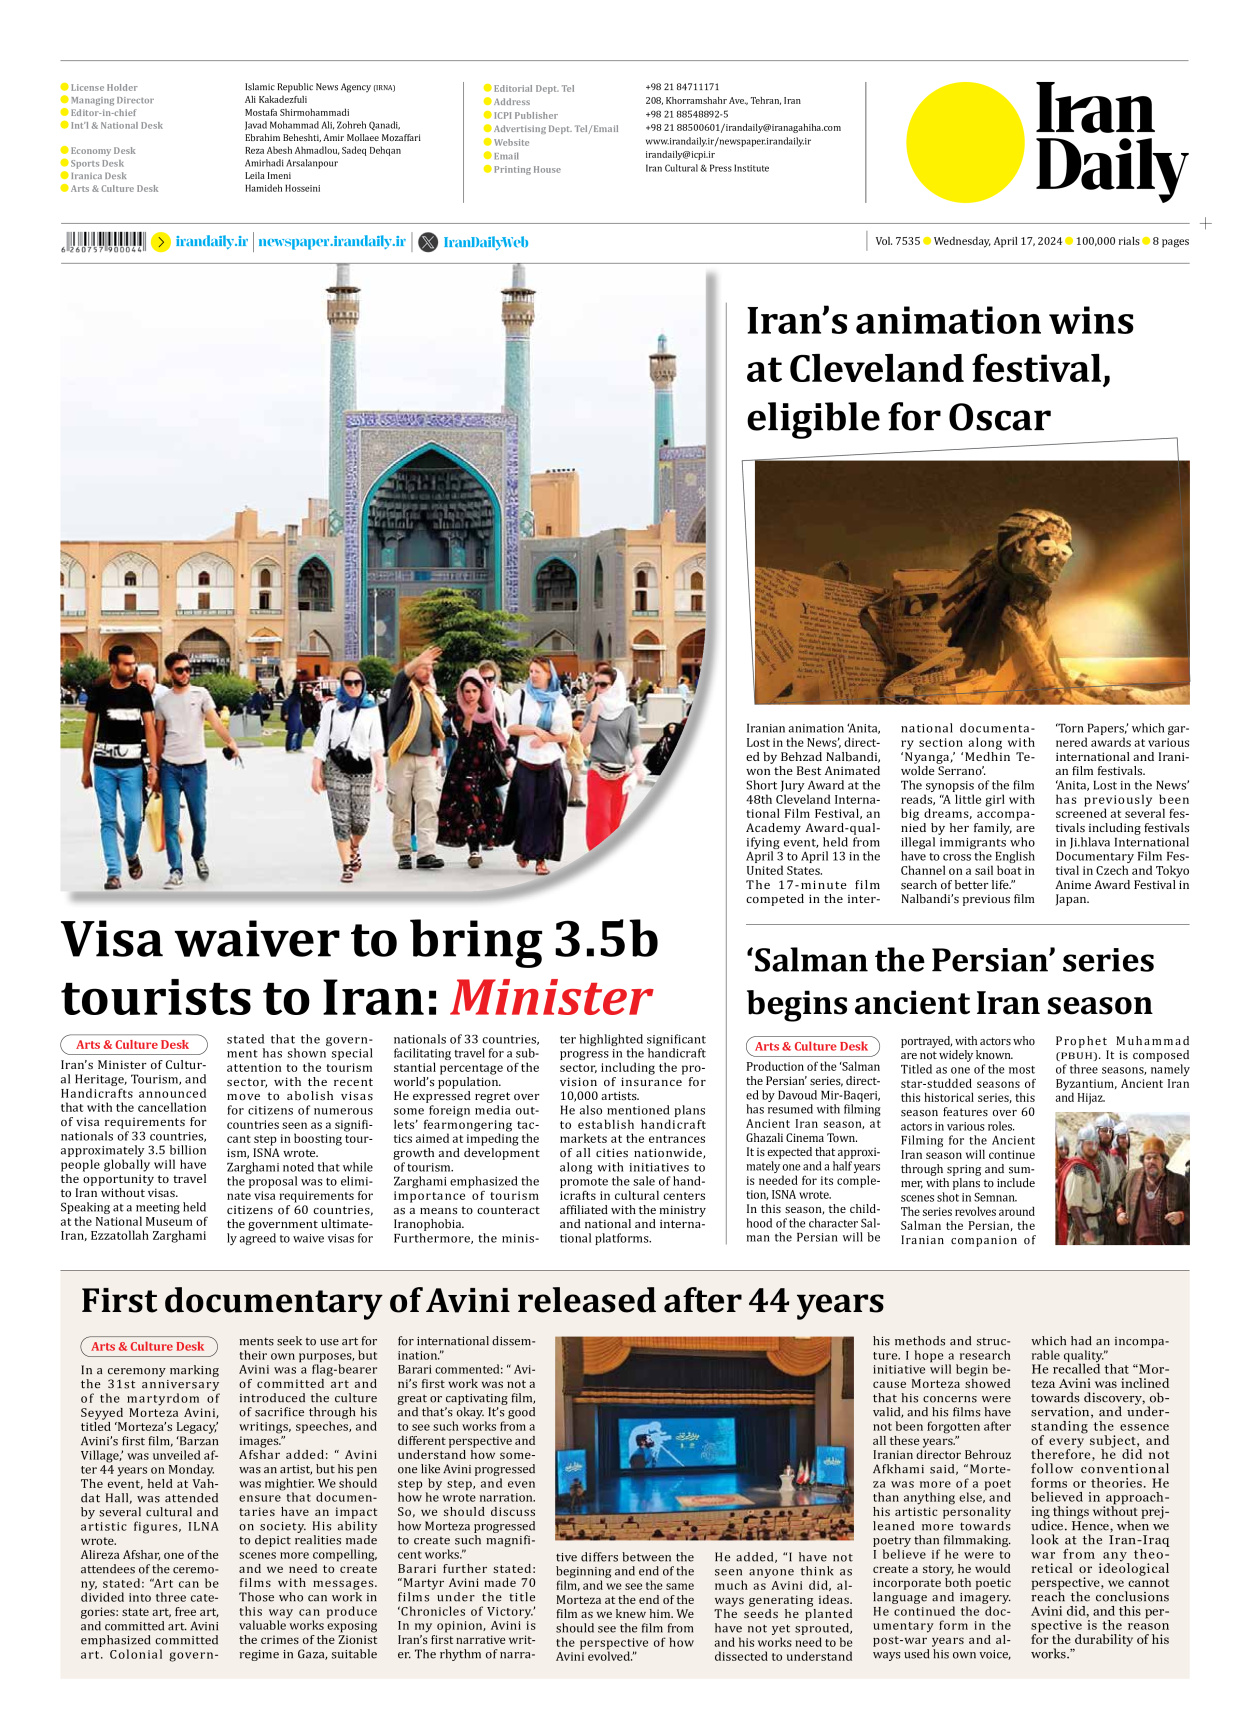 Iran Daily - Number Seven Thousand Five Hundred and Thirty Five - 17 April 2024 - Page 8